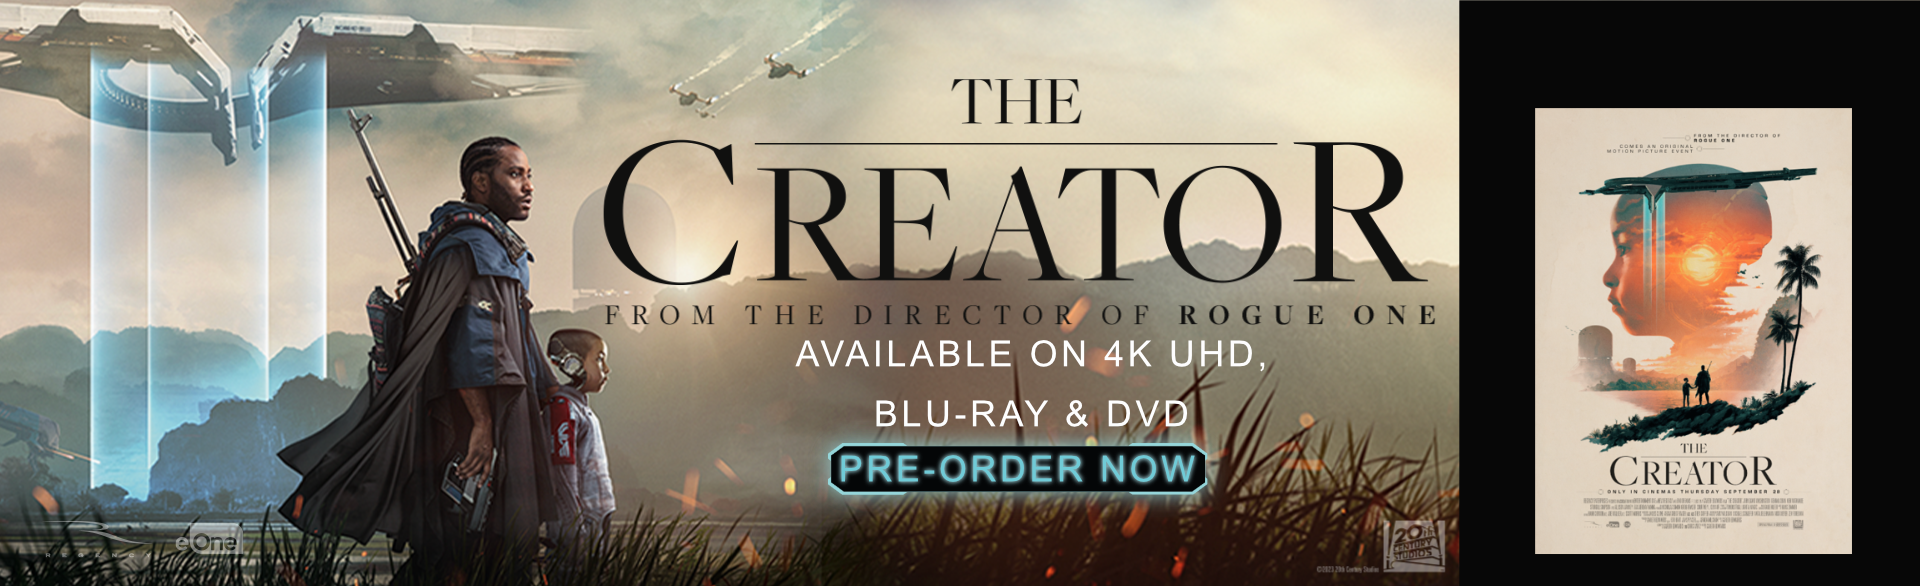 The Creator Signed Poster Competition